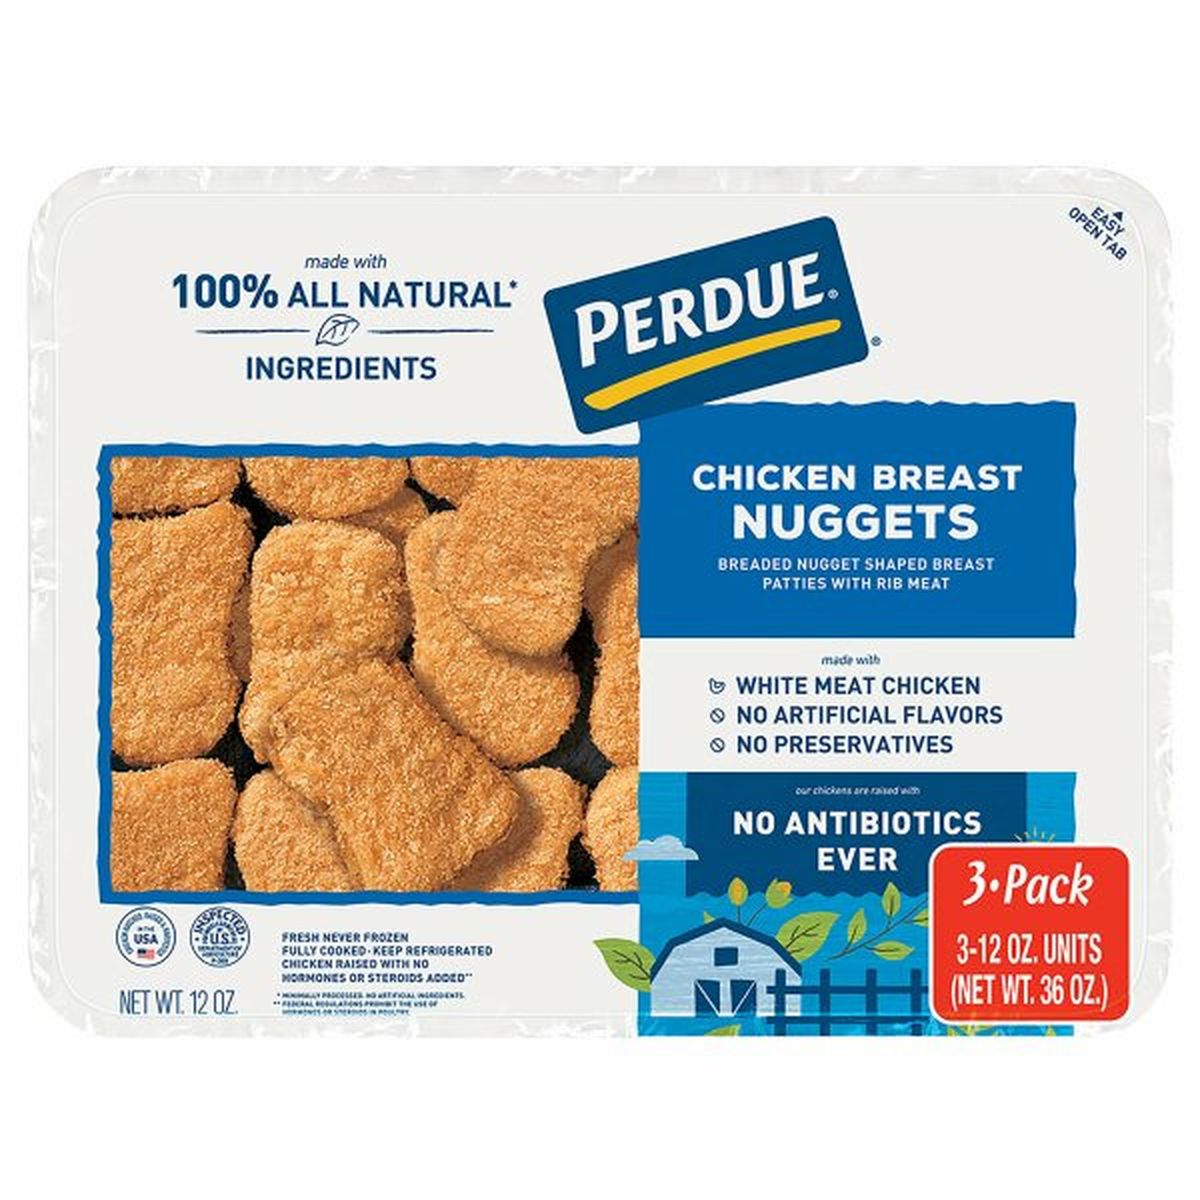 Calories in Perdue Chicken Breast, Nuggets, 3 Pack